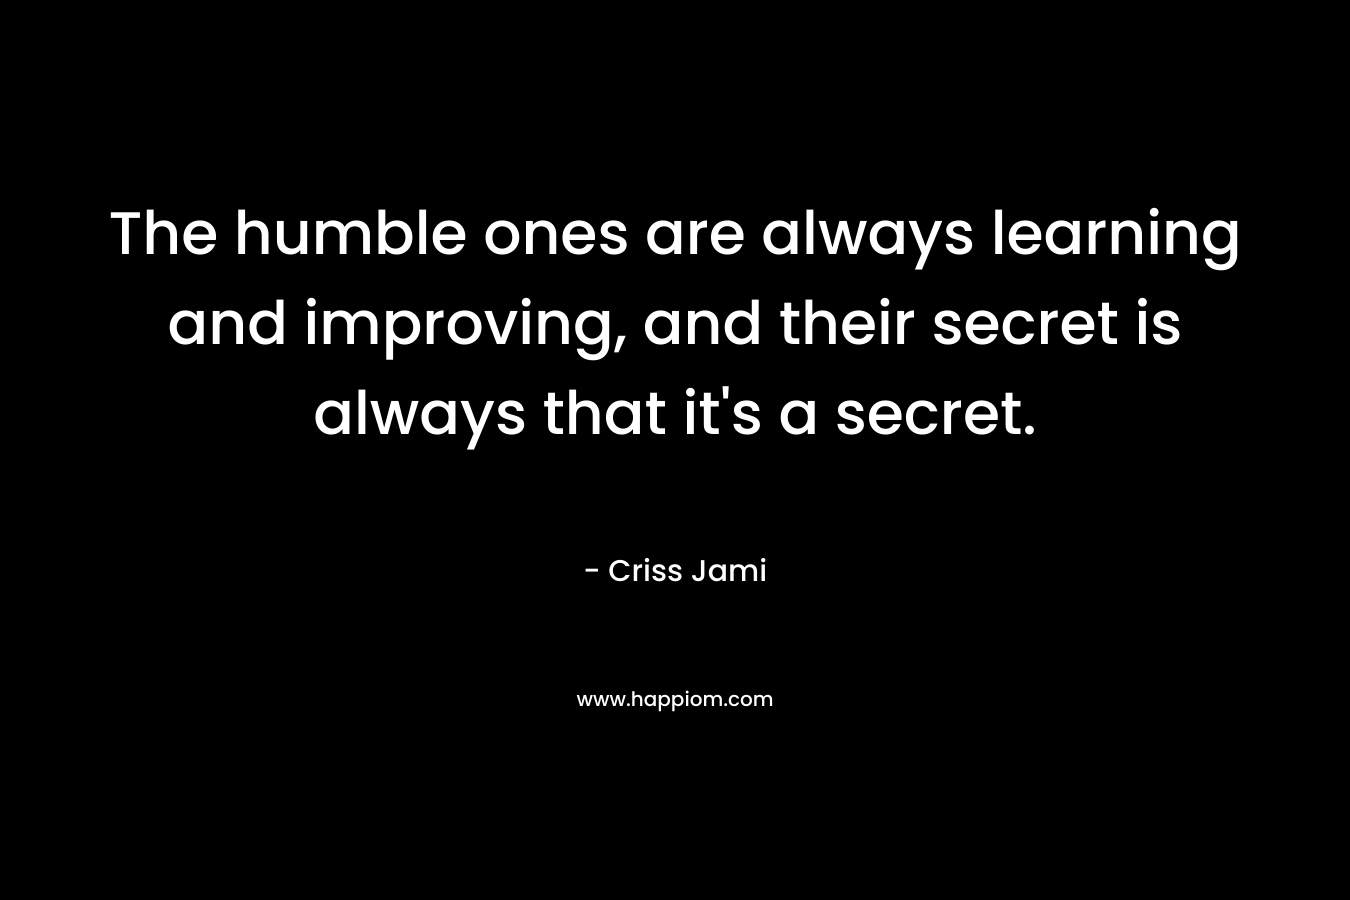 The humble ones are always learning and improving, and their secret is always that it's a secret.